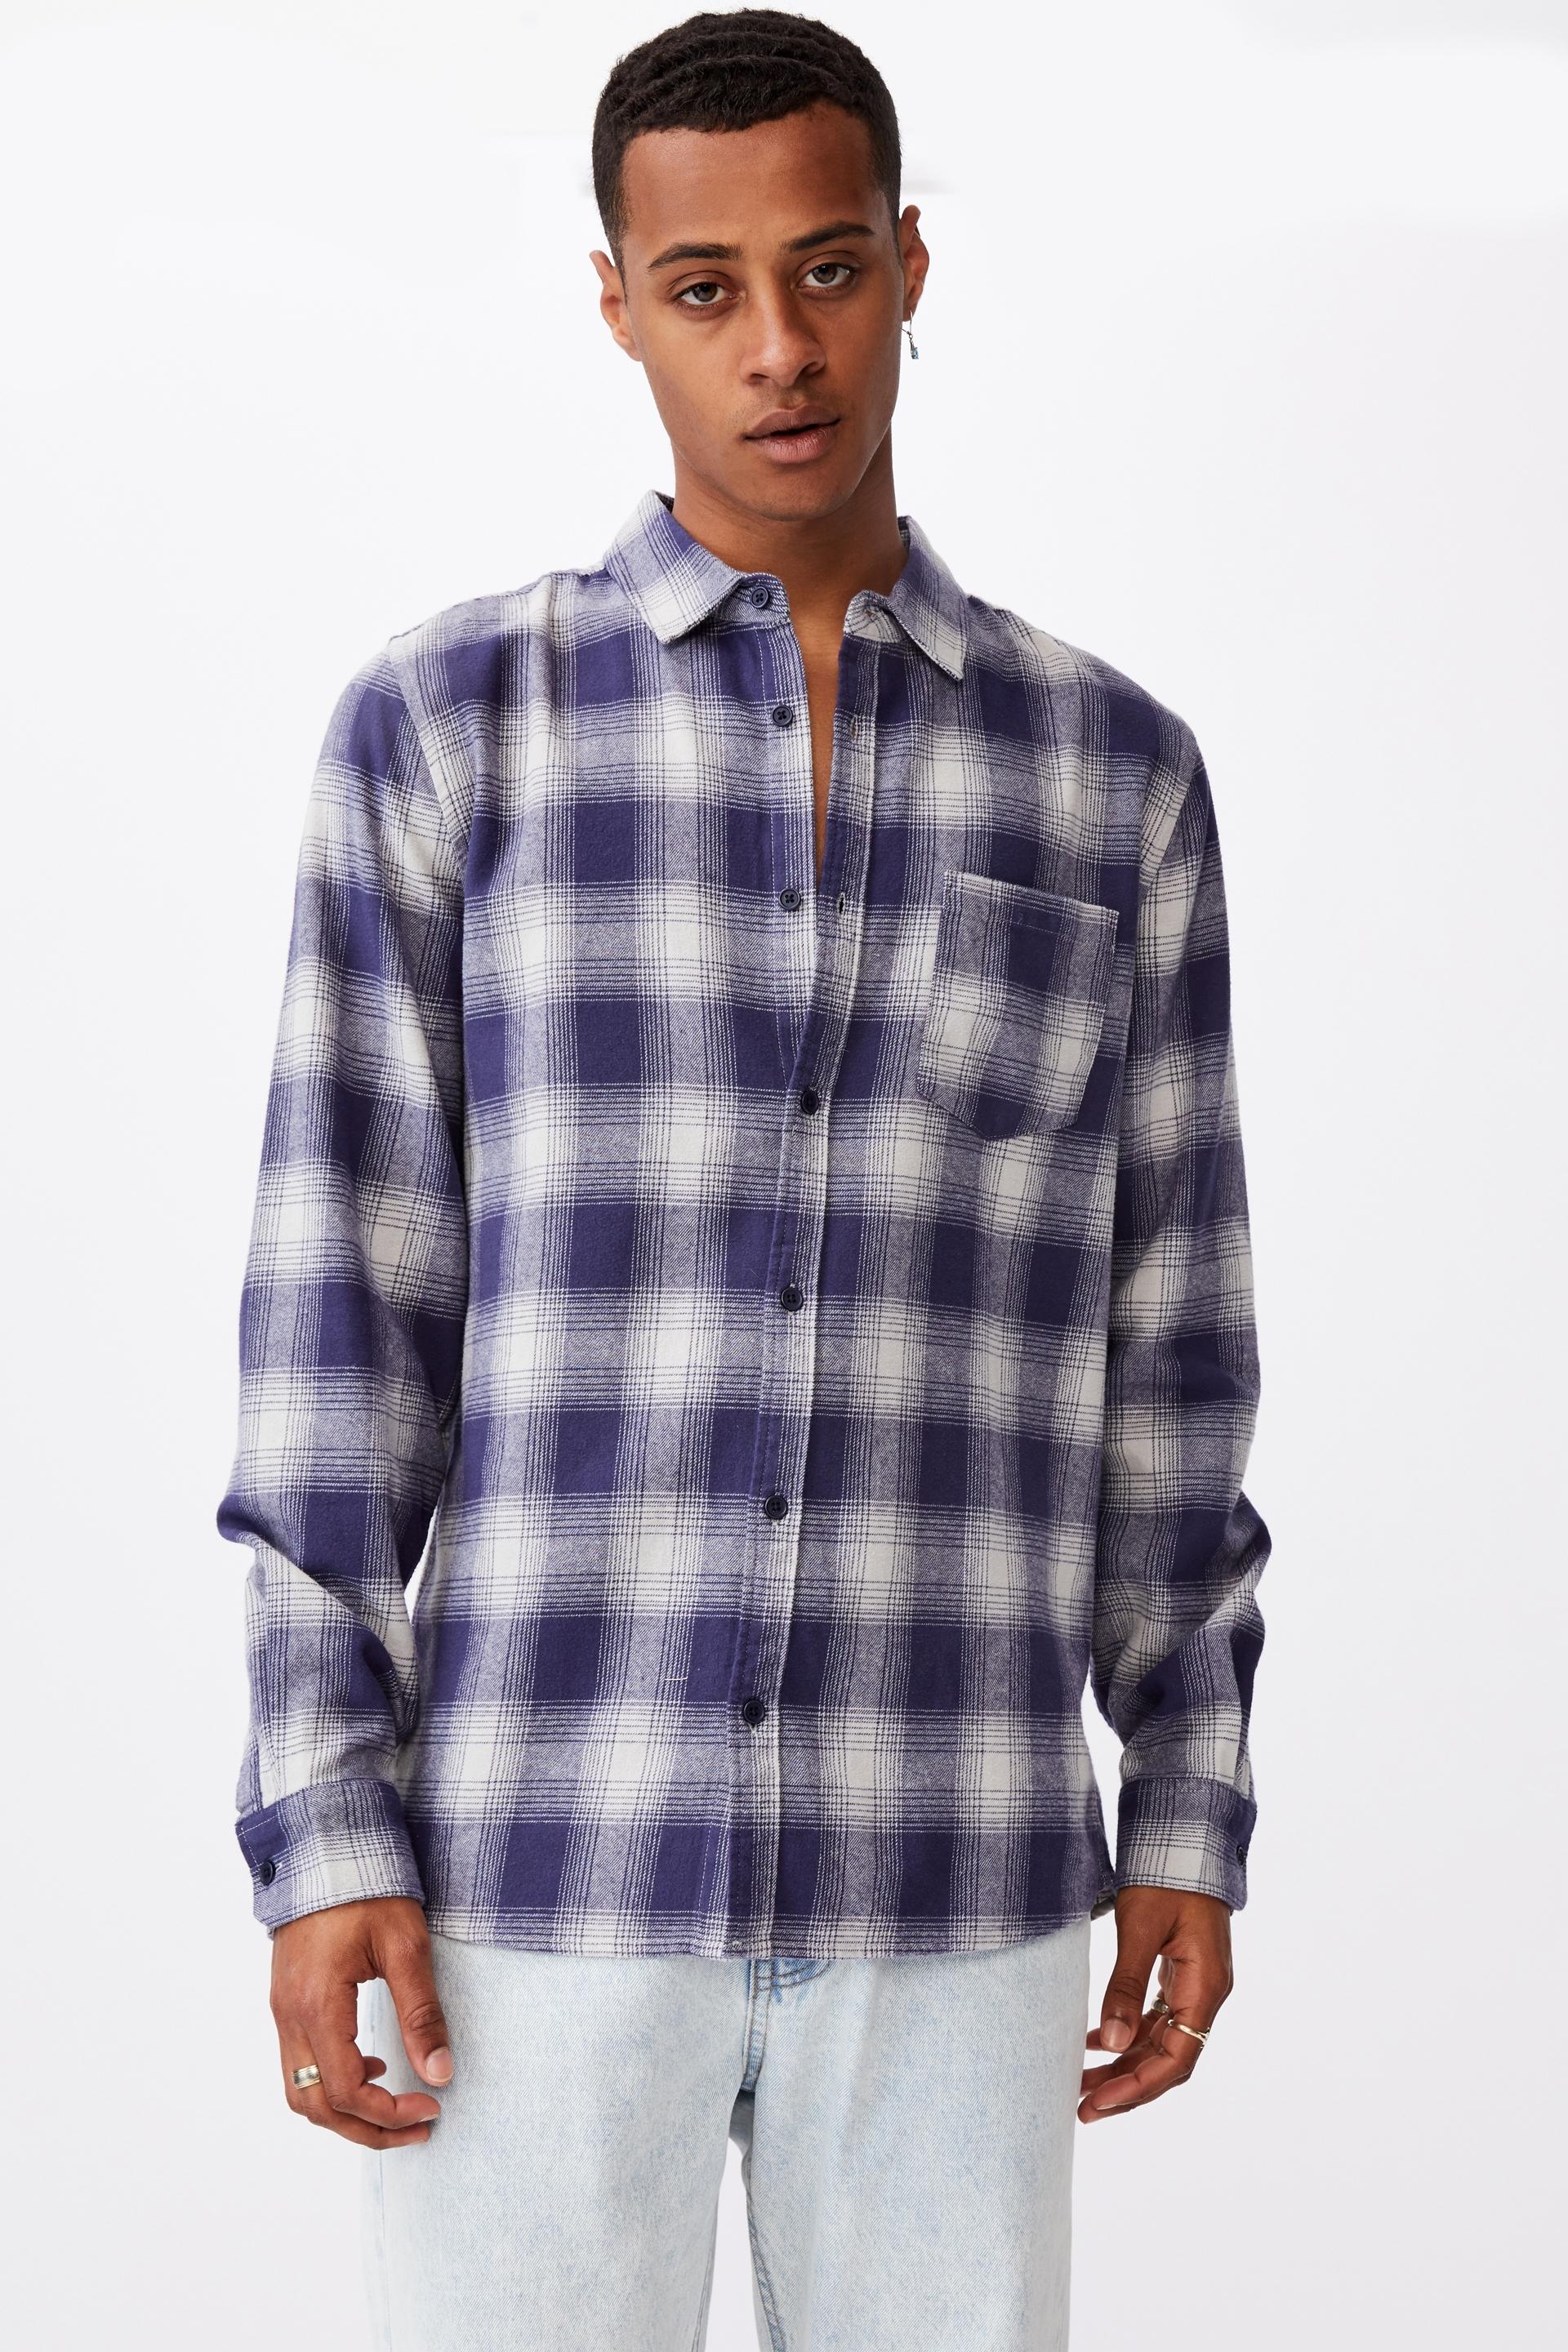 Washed long sleeve check shirt - mid blue ombre check Cotton On Shirts ...